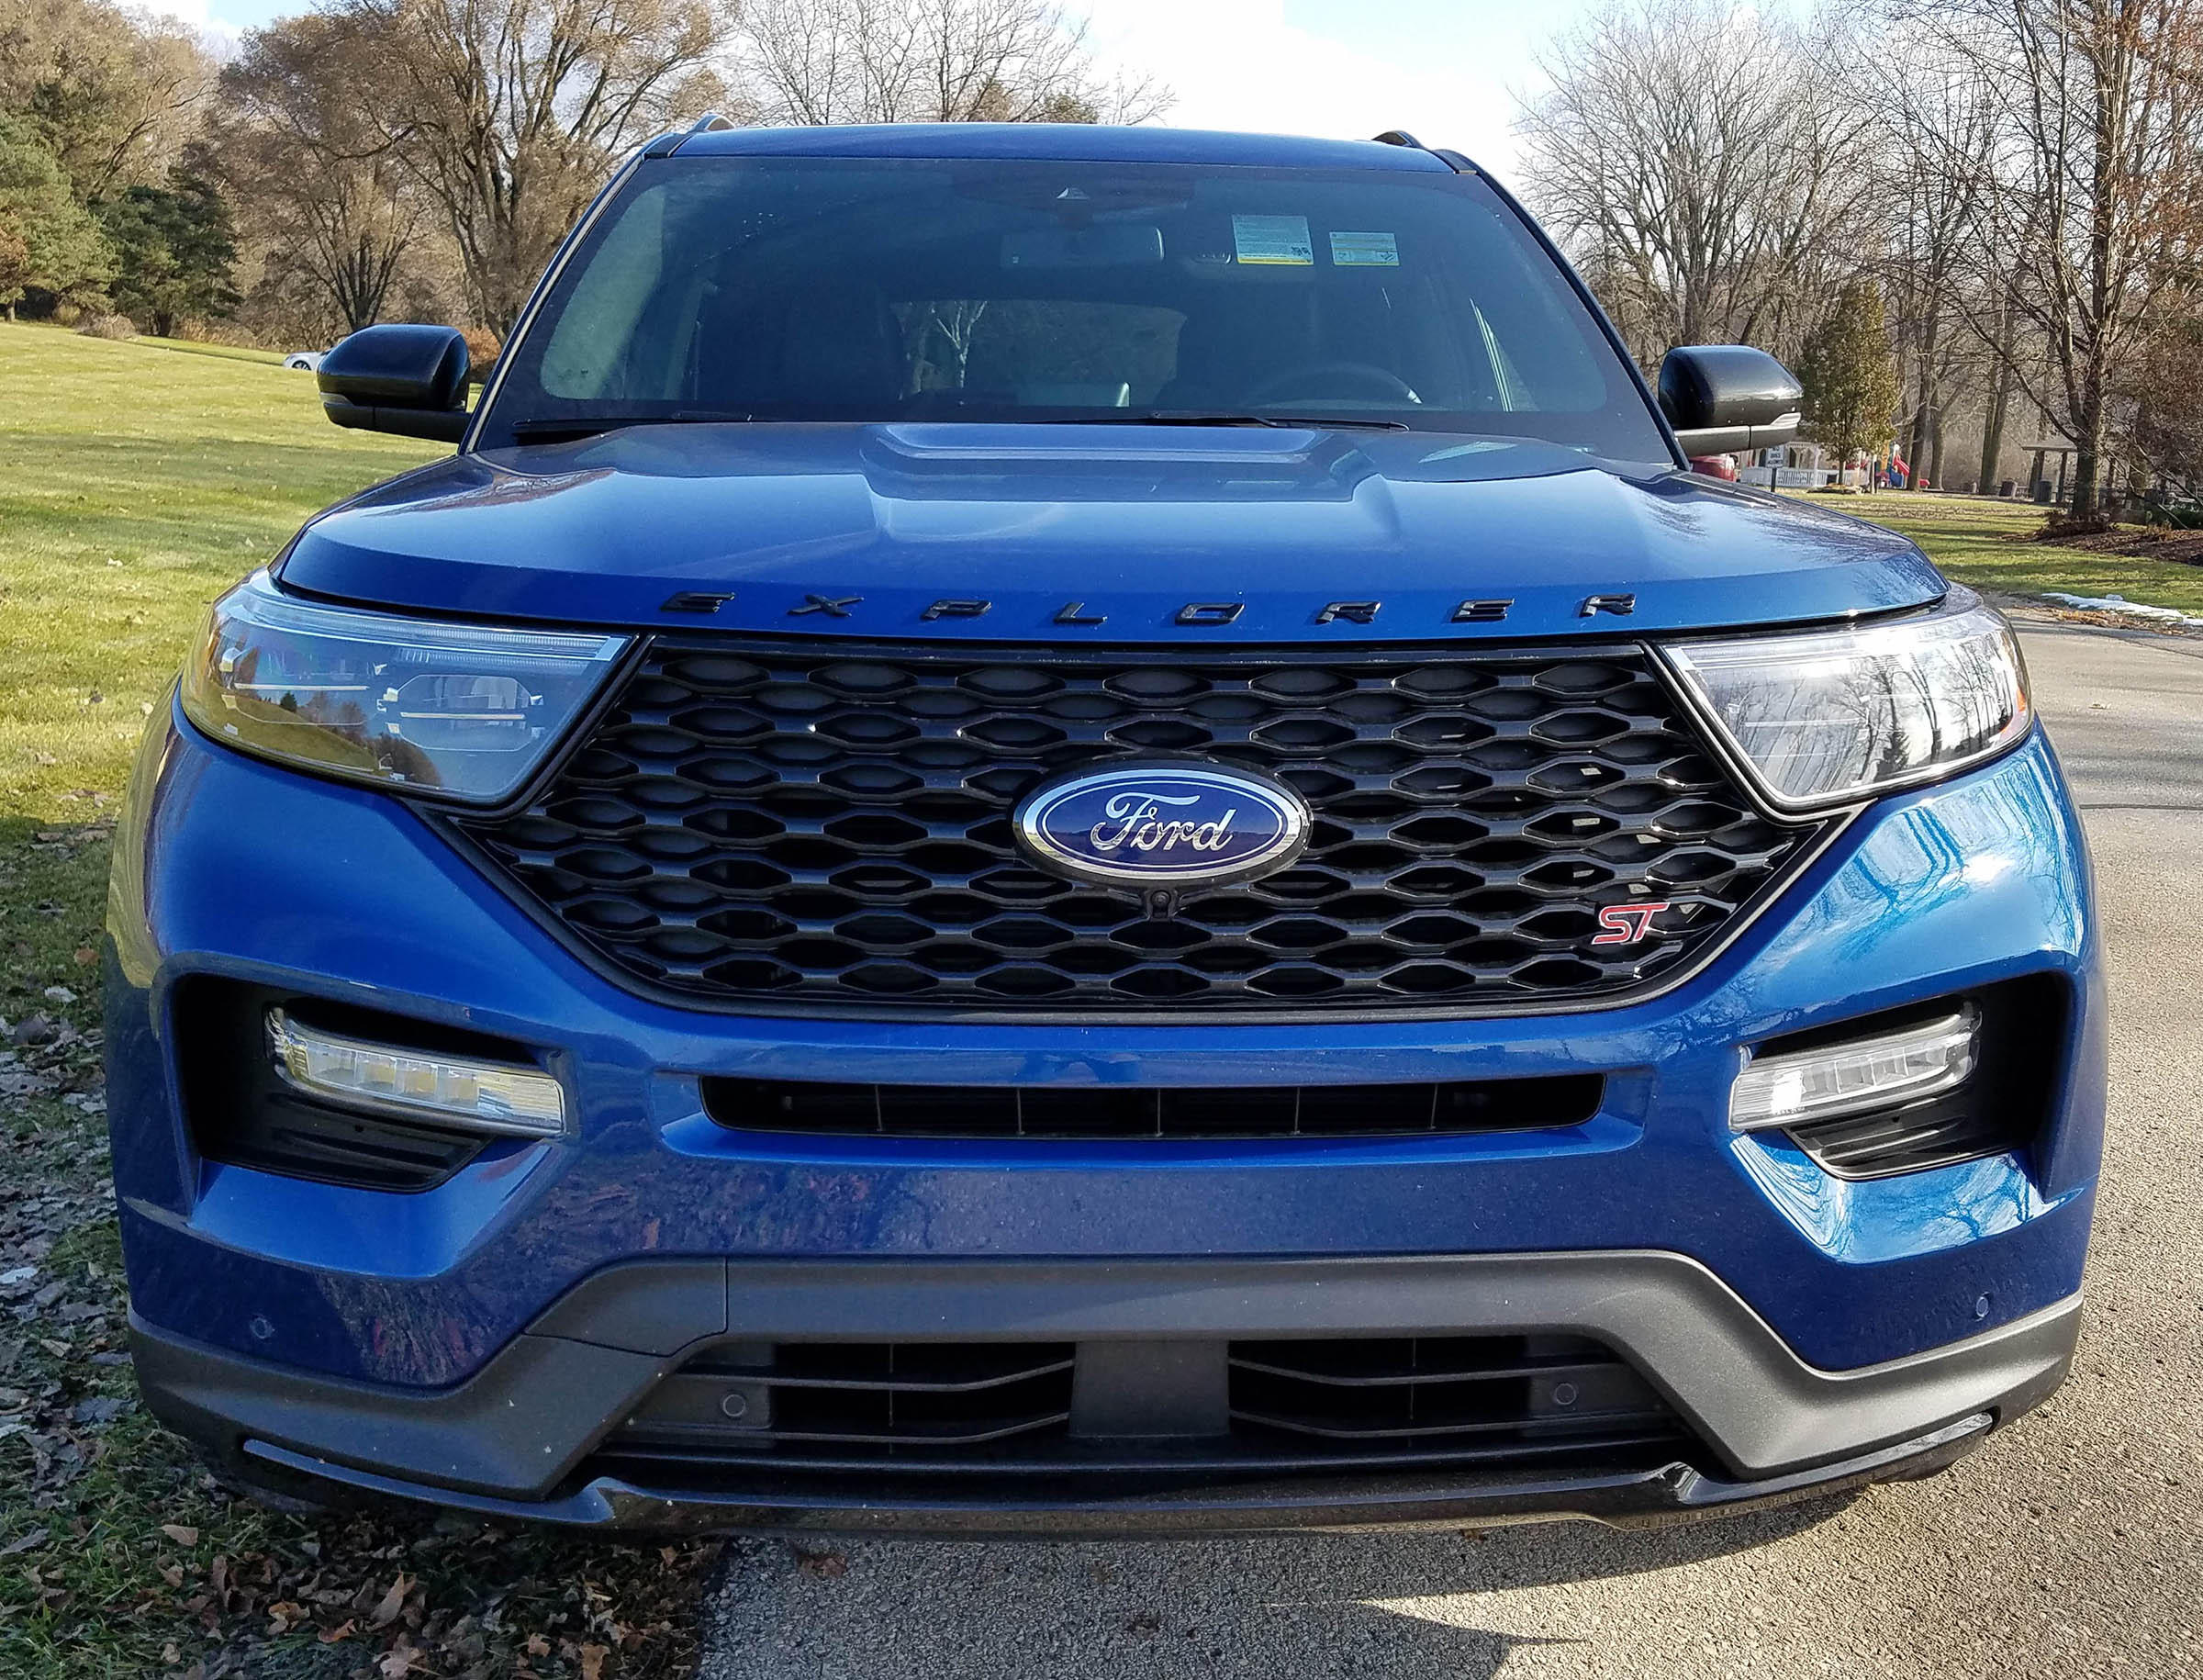 2020 Ford Explorer St Awd Review Wuwm